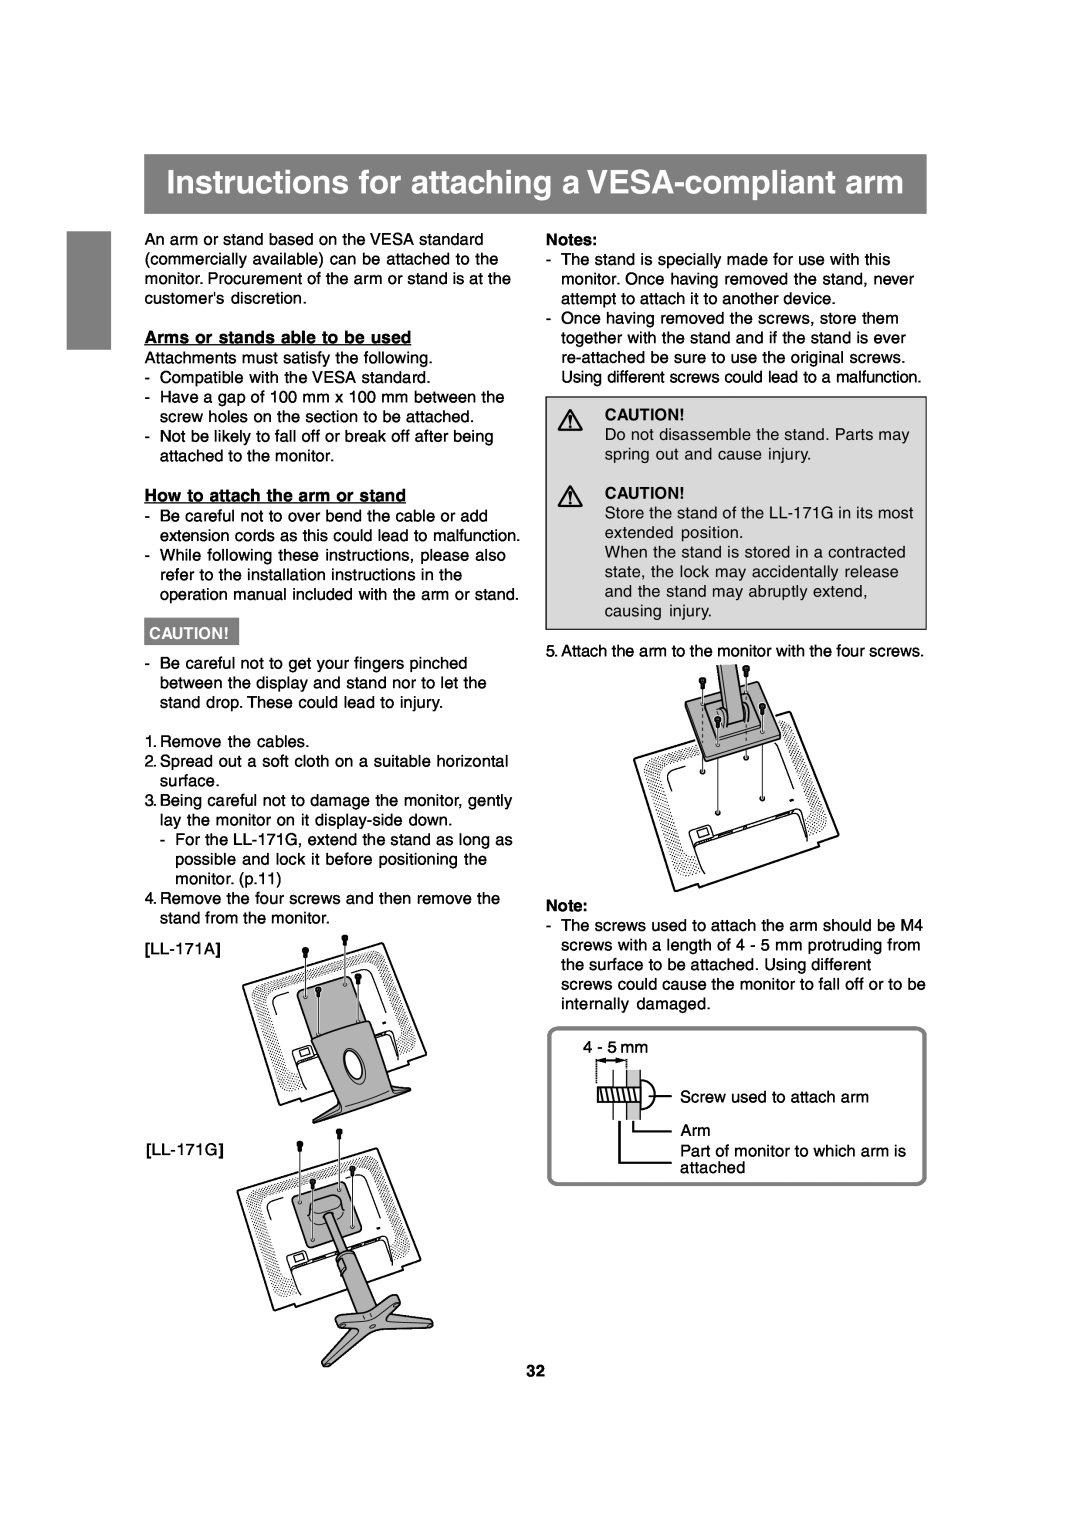 Sharp LL-171A LL-171G operation manual Instructions for attaching a VESA-compliant arm, Arms or stands able to be used 